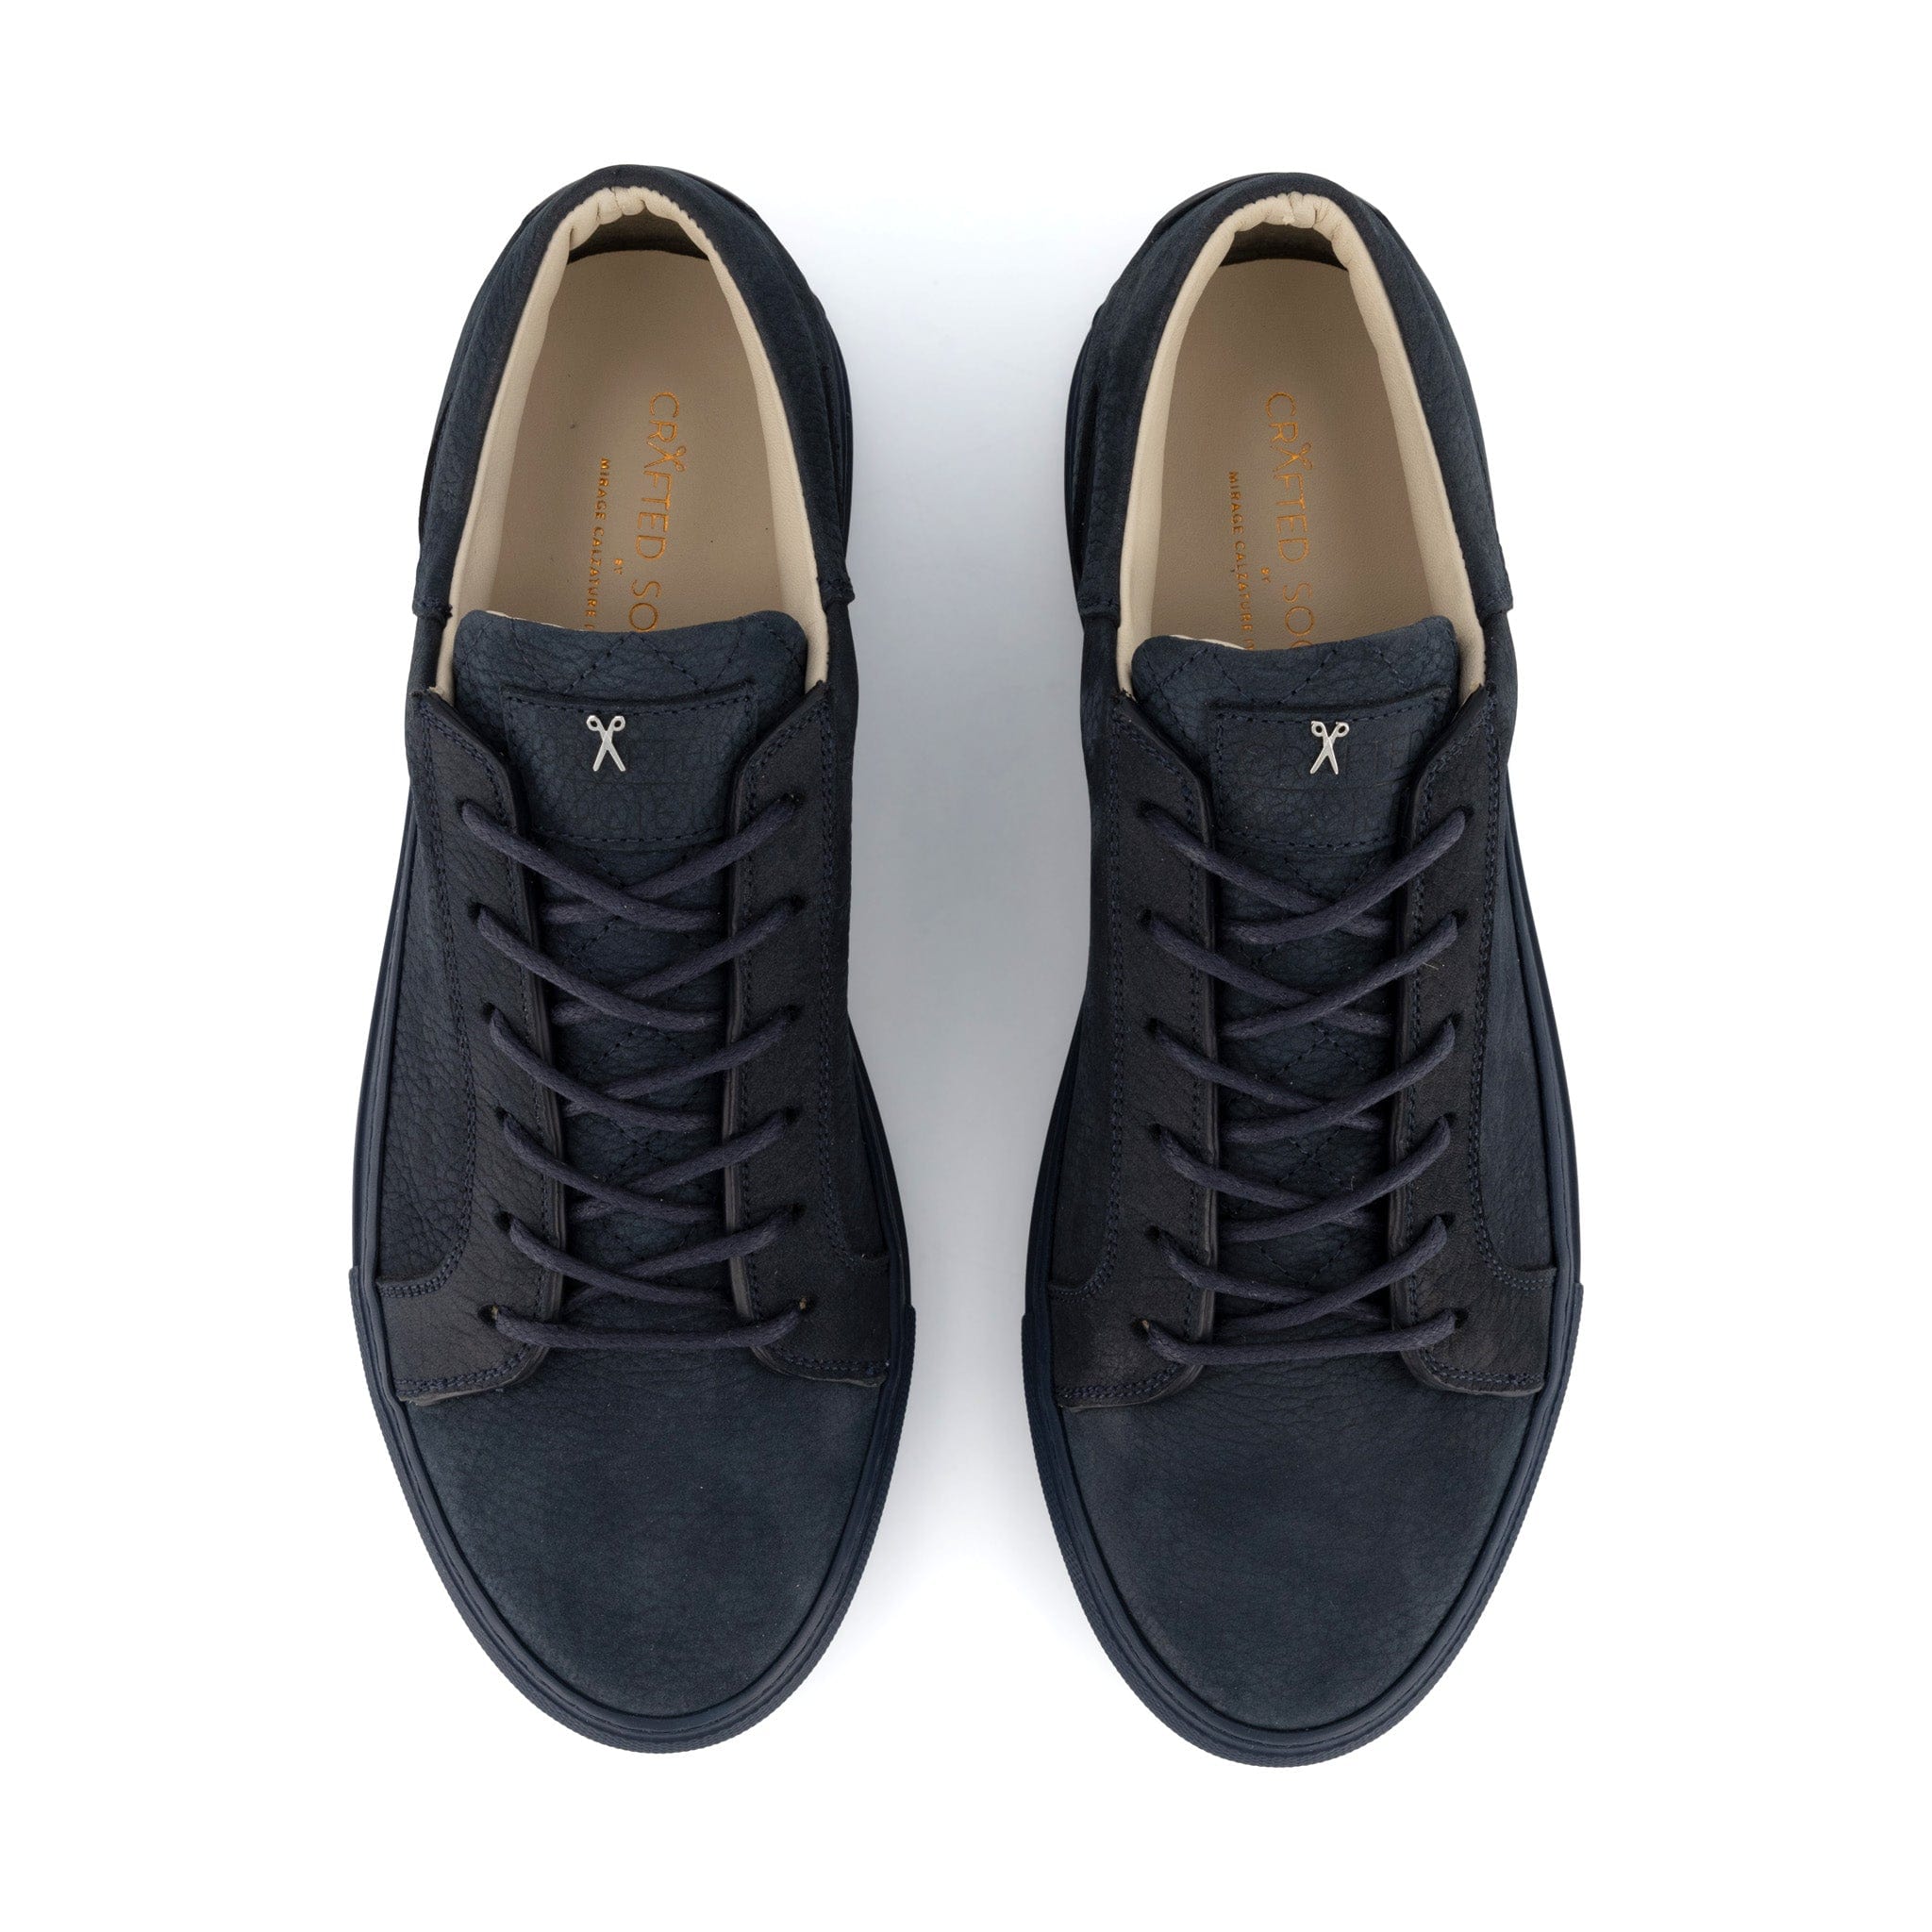 Mario Low Refined Sneaker | Navy Nubuck | Navy Outsole | Made in Italy